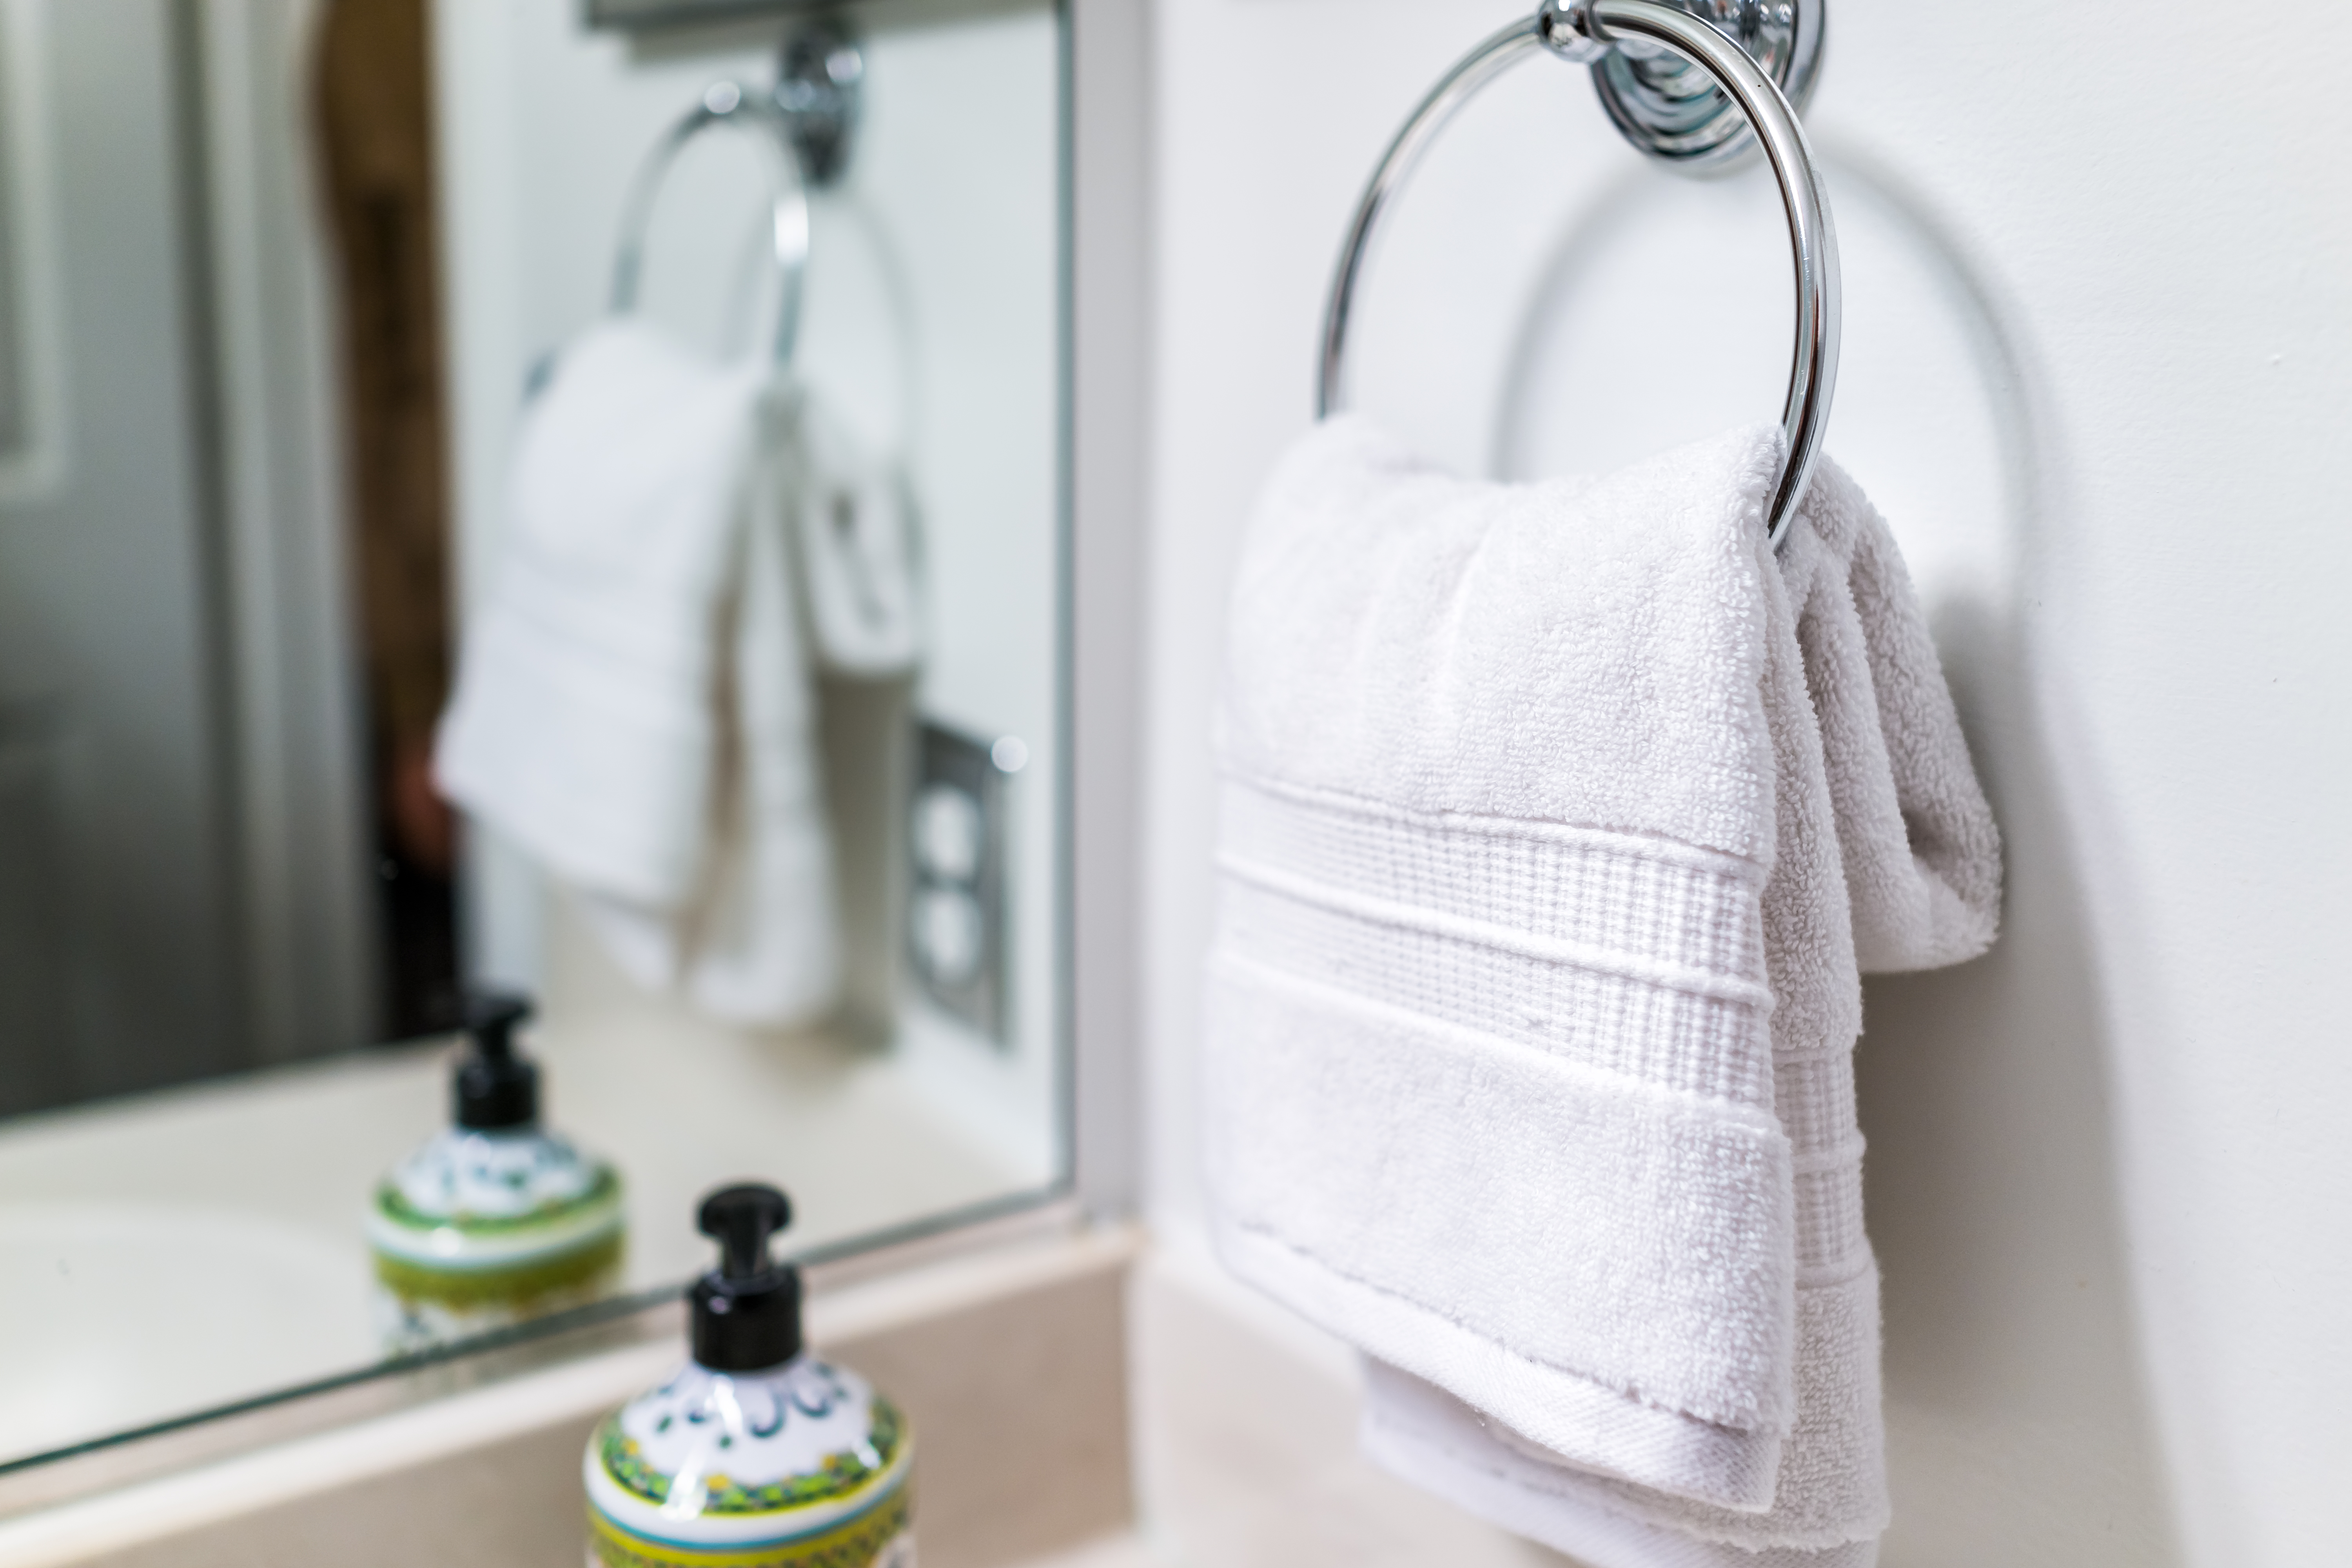 How to Find & Install the Right Towel Bar Height for Your Bathroom